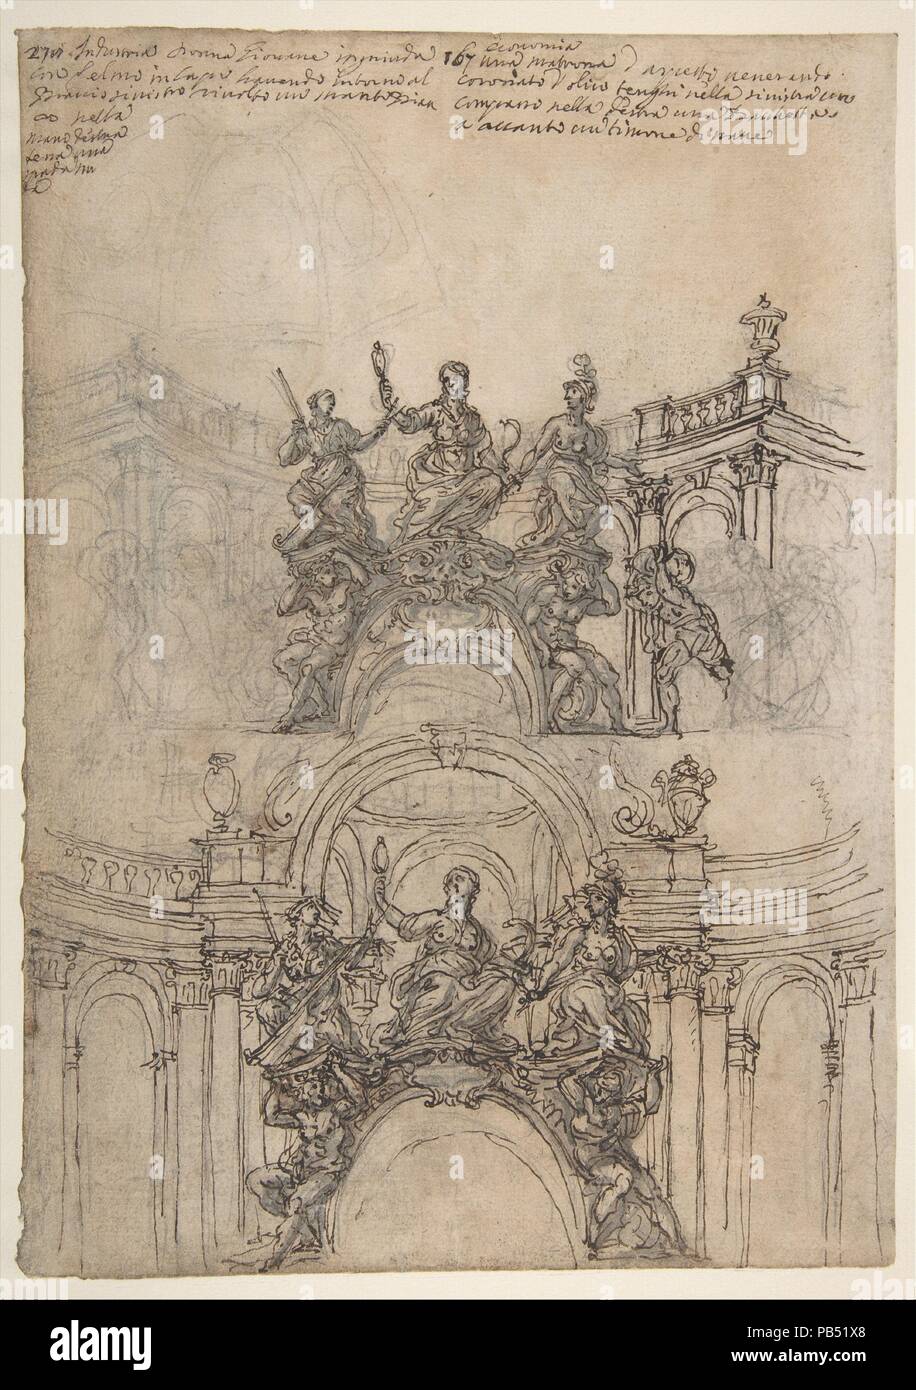 Studies for a Sculpture with Figures of Prudence, Industry and Economy Supported by Slaves and an Oval Plaque with Cartouche; Separate Study for a Cupola (Recto). Studies for Figural Ornament (Verso). Artist: Giovanni Battista Foggini (Italian, Florence 1652-1725 Florence). Dimensions: sheet: 11 15/16 x 8 3/8 in. (30.3 x 21.3 cm). Date: 1652-1725. Museum: Metropolitan Museum of Art, New York, USA. Stock Photo